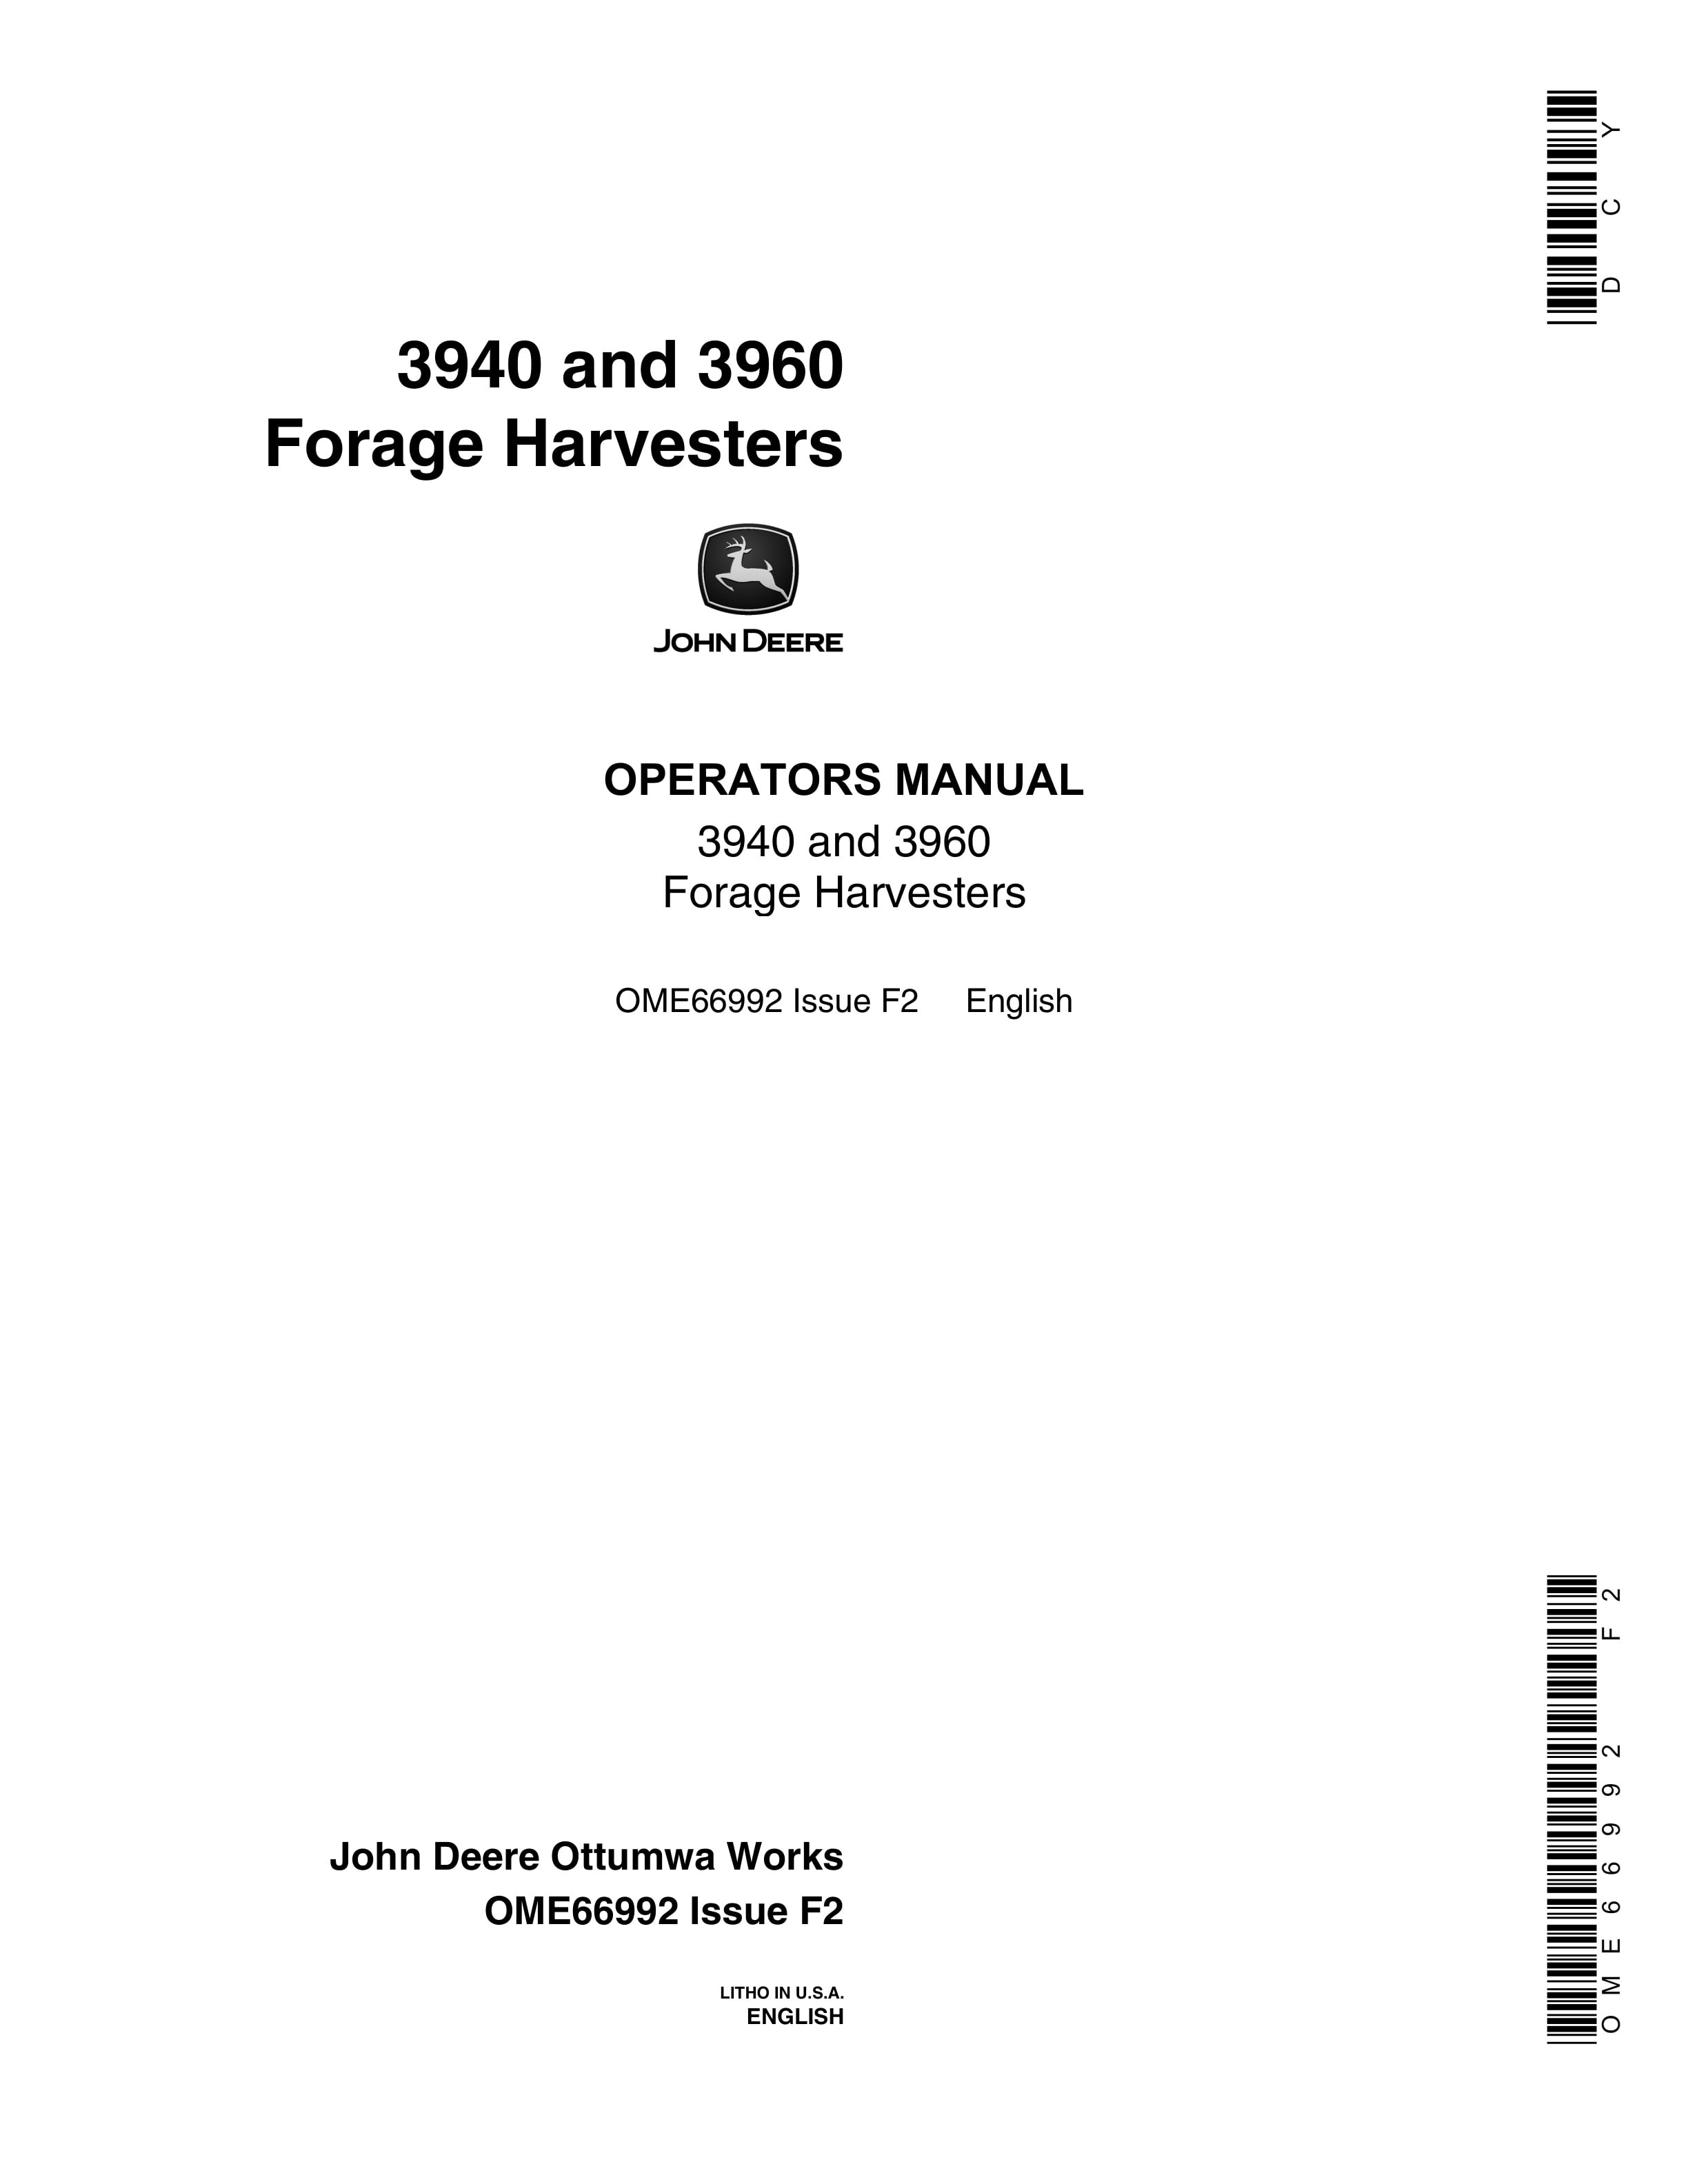 John Deere 3940 and 3960 Forage Harvesters Operator Manual OME66992 1